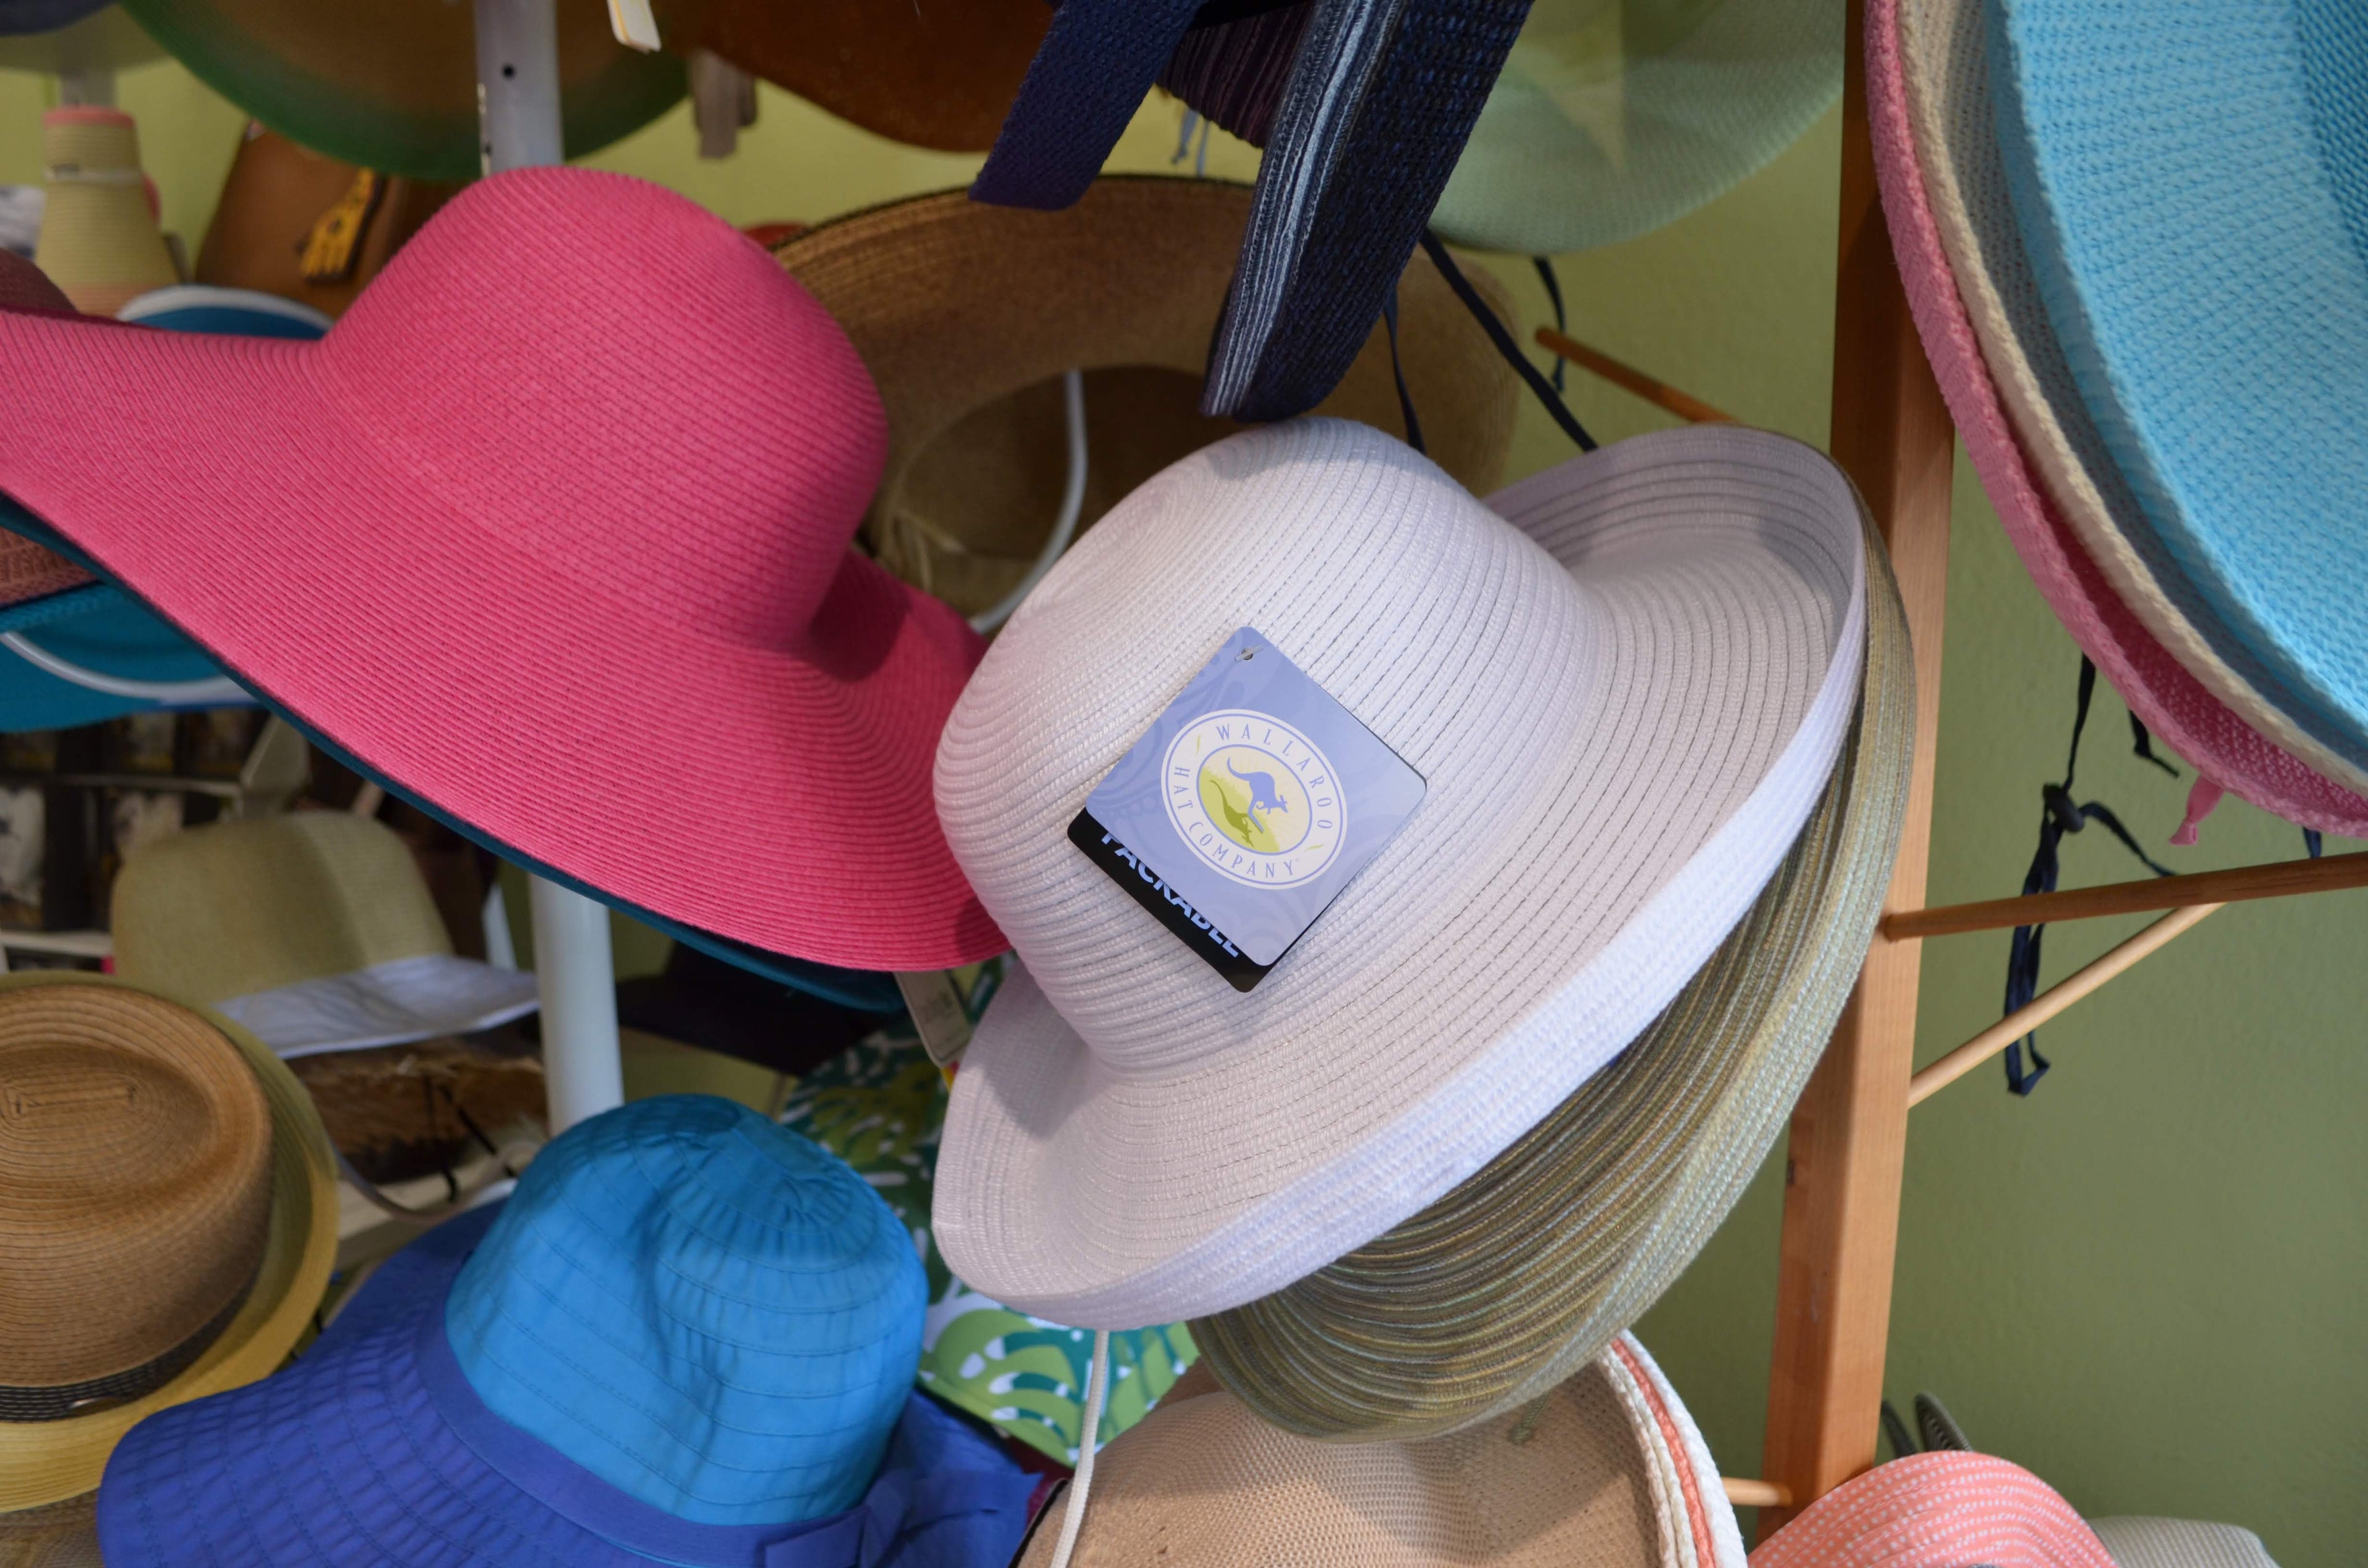 Explore a vibrant collection of sun-protective UPF 50+ hats on display in our Florida store. From classic to fashion-forward styles, these crushable and stylish hats offer effective UV protection for the savvy shopper seeking functional and colorful headwear options.